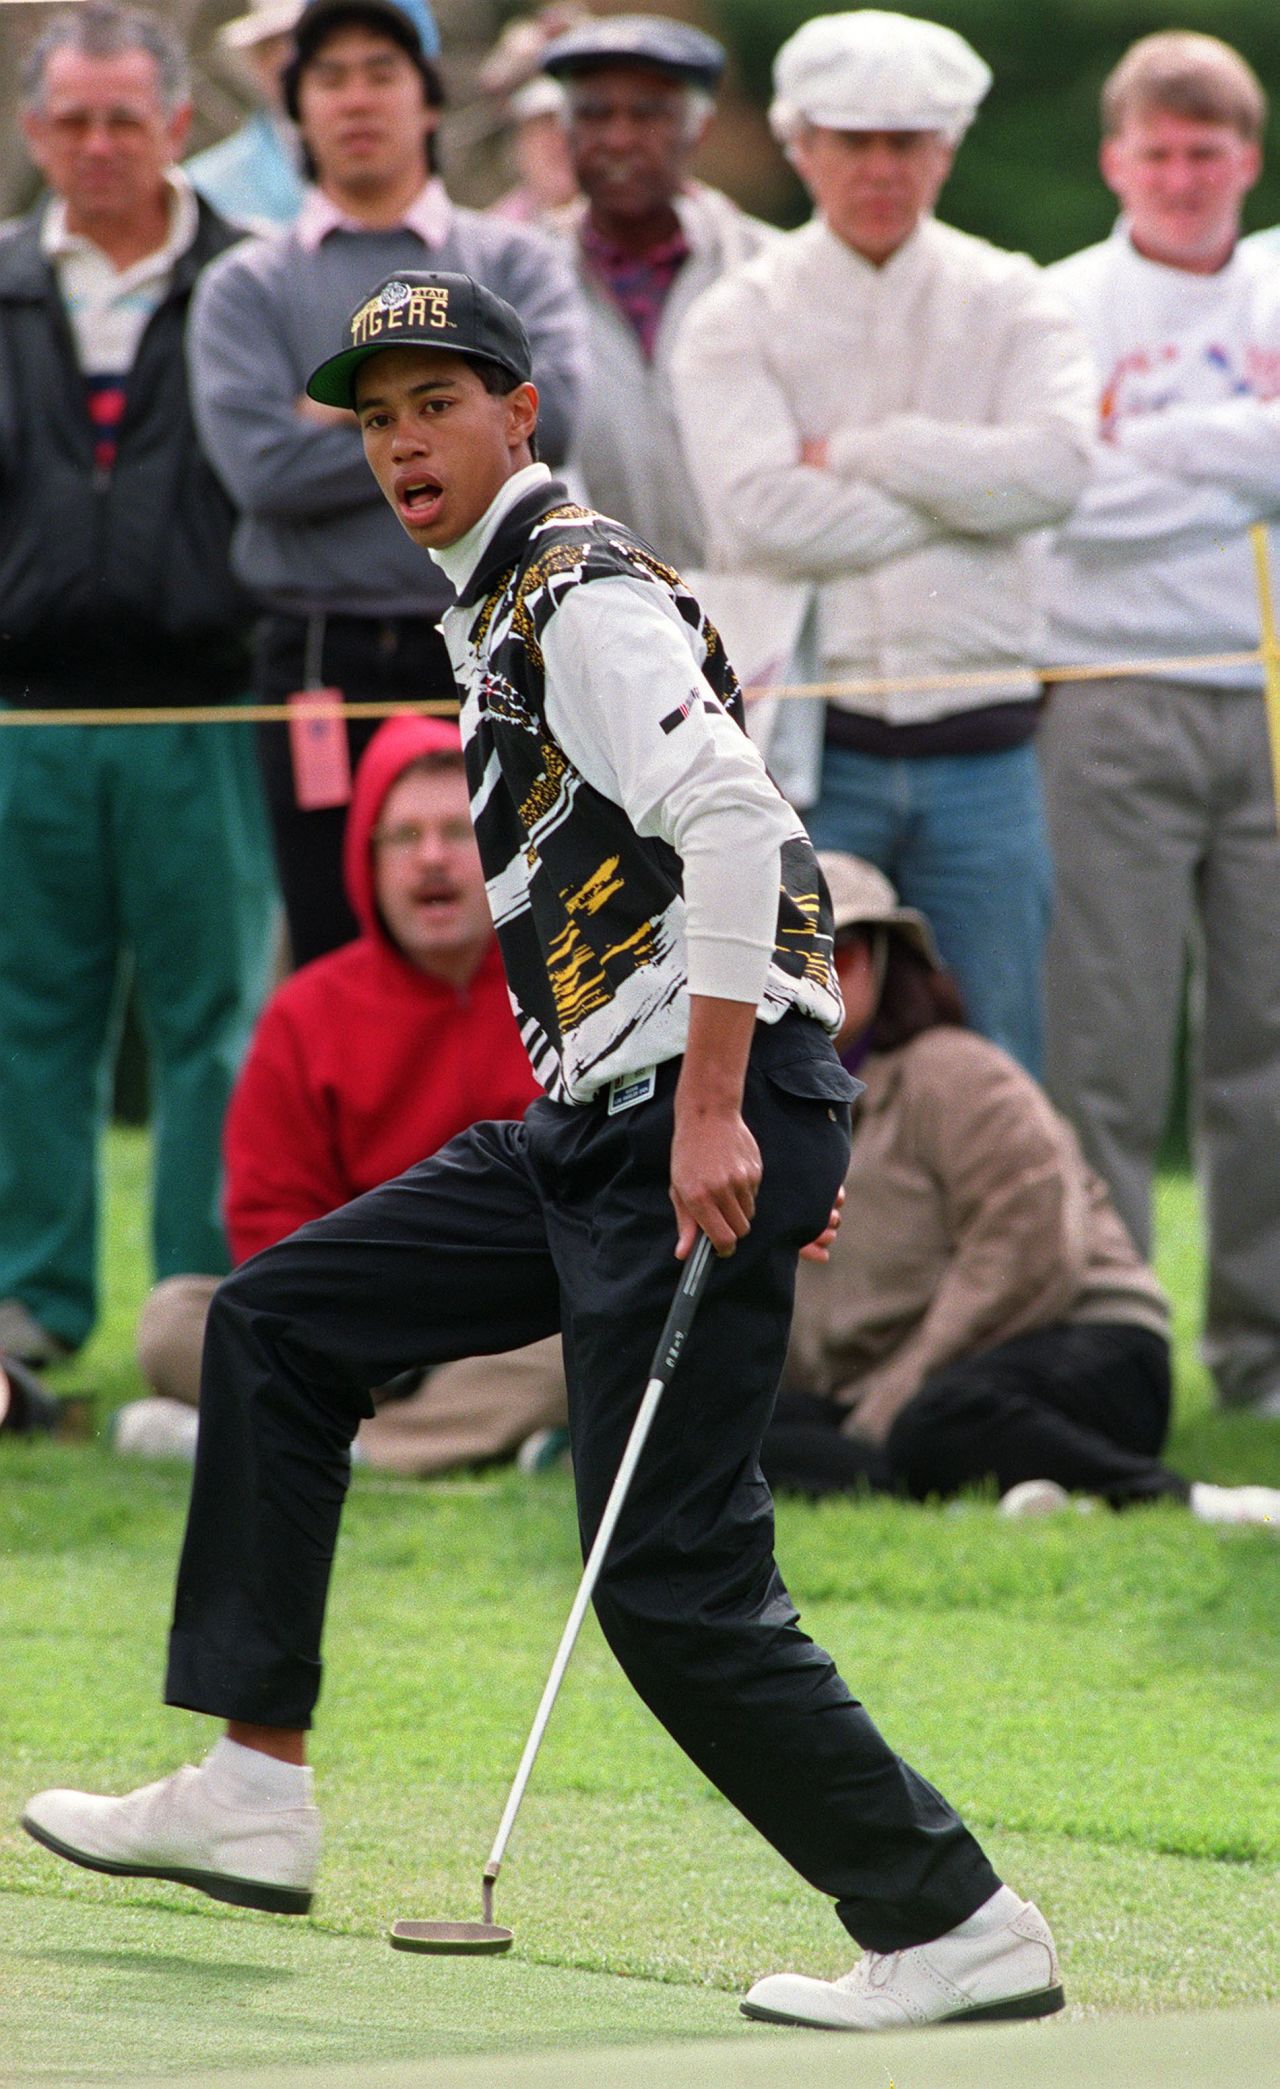 High school student Woods, 17, reacts after making a birdie putt on the 15th hole of the Los Angeles Open.